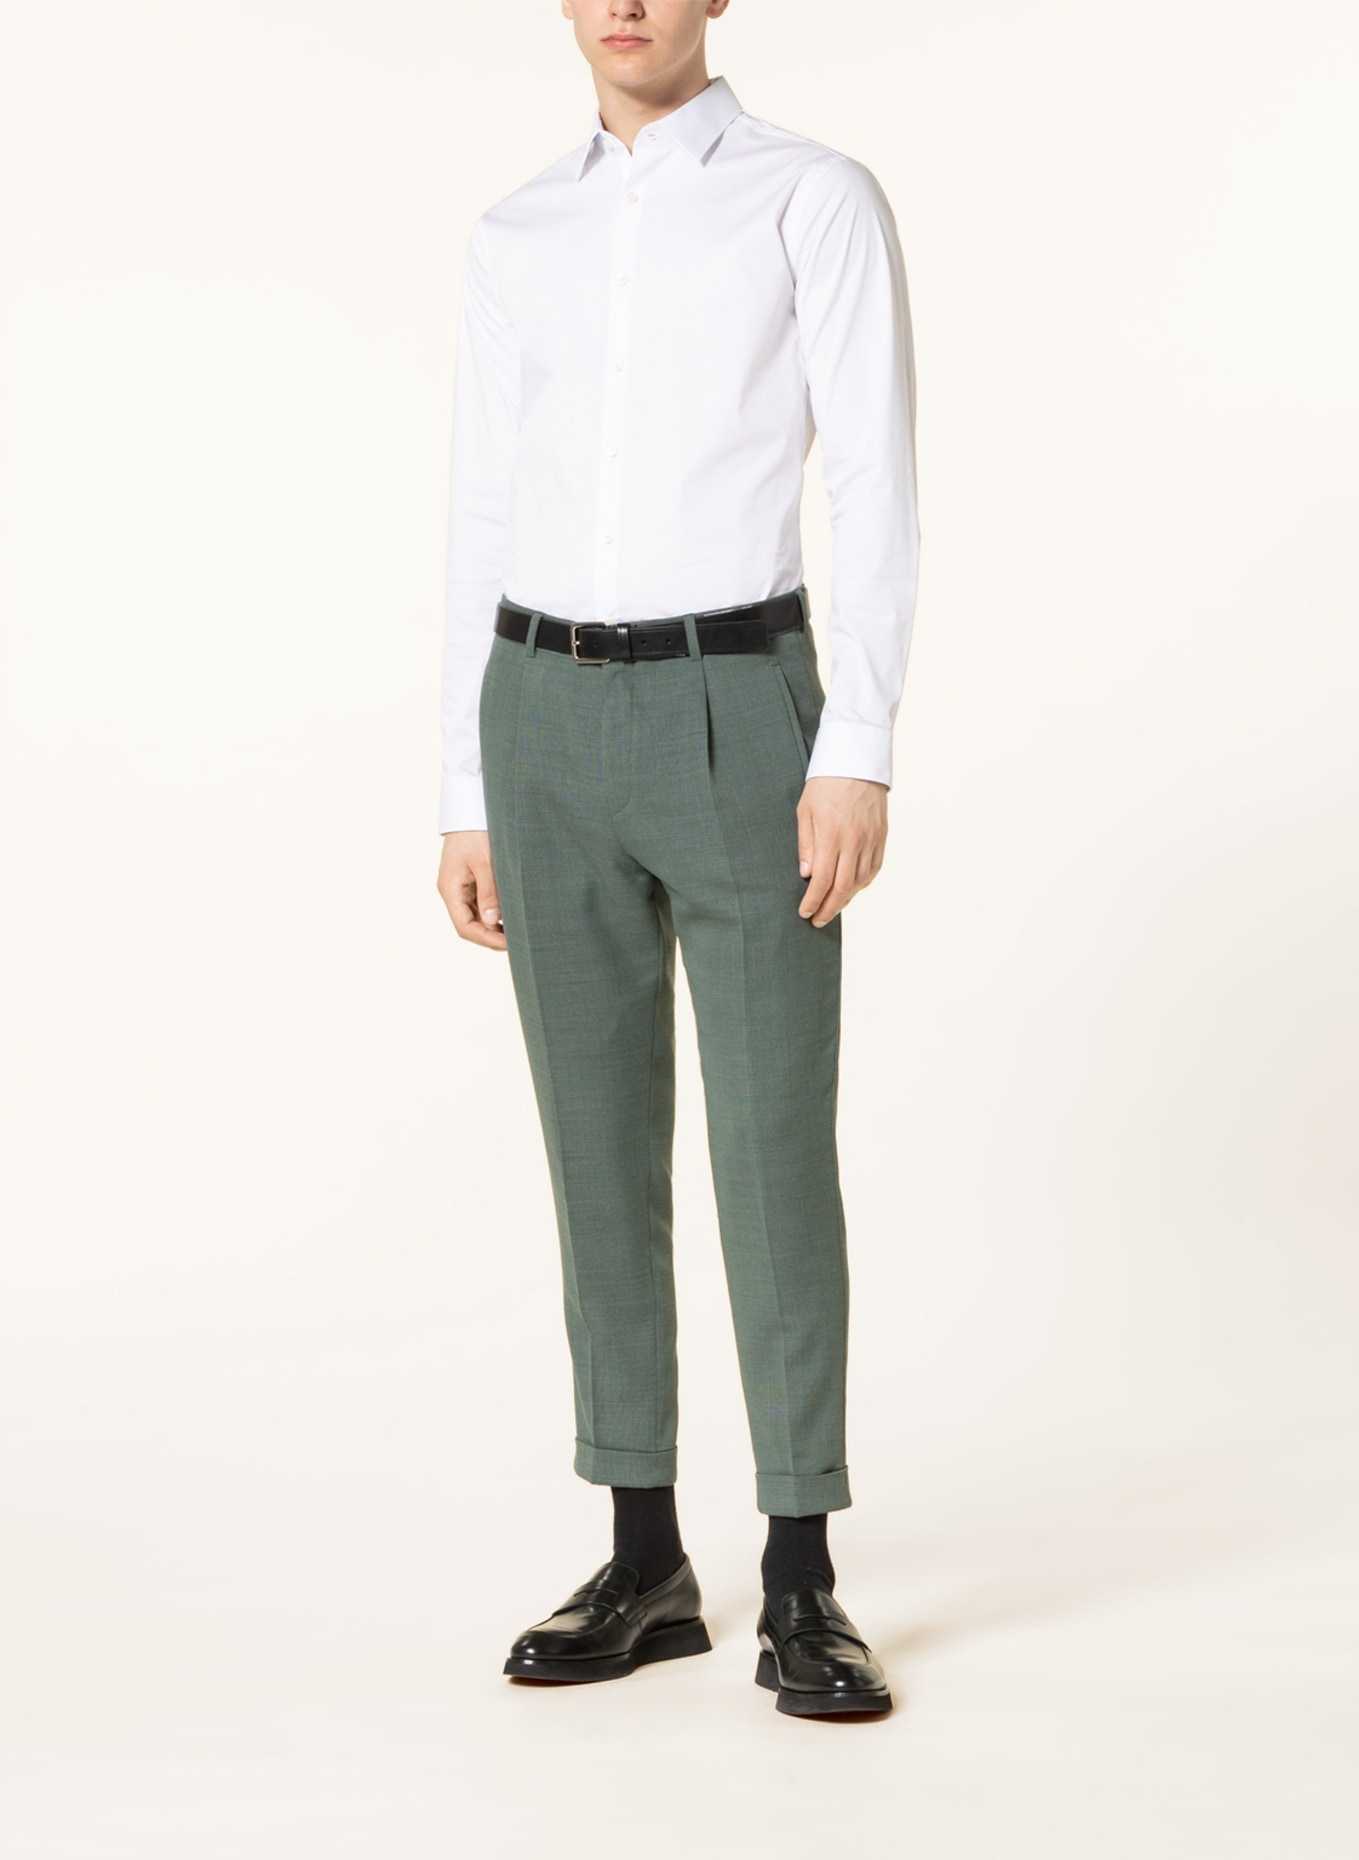 STRELLSON Suit pants LUIS relaxed fit, Color: 310 Medium Green               310 (Image 2)